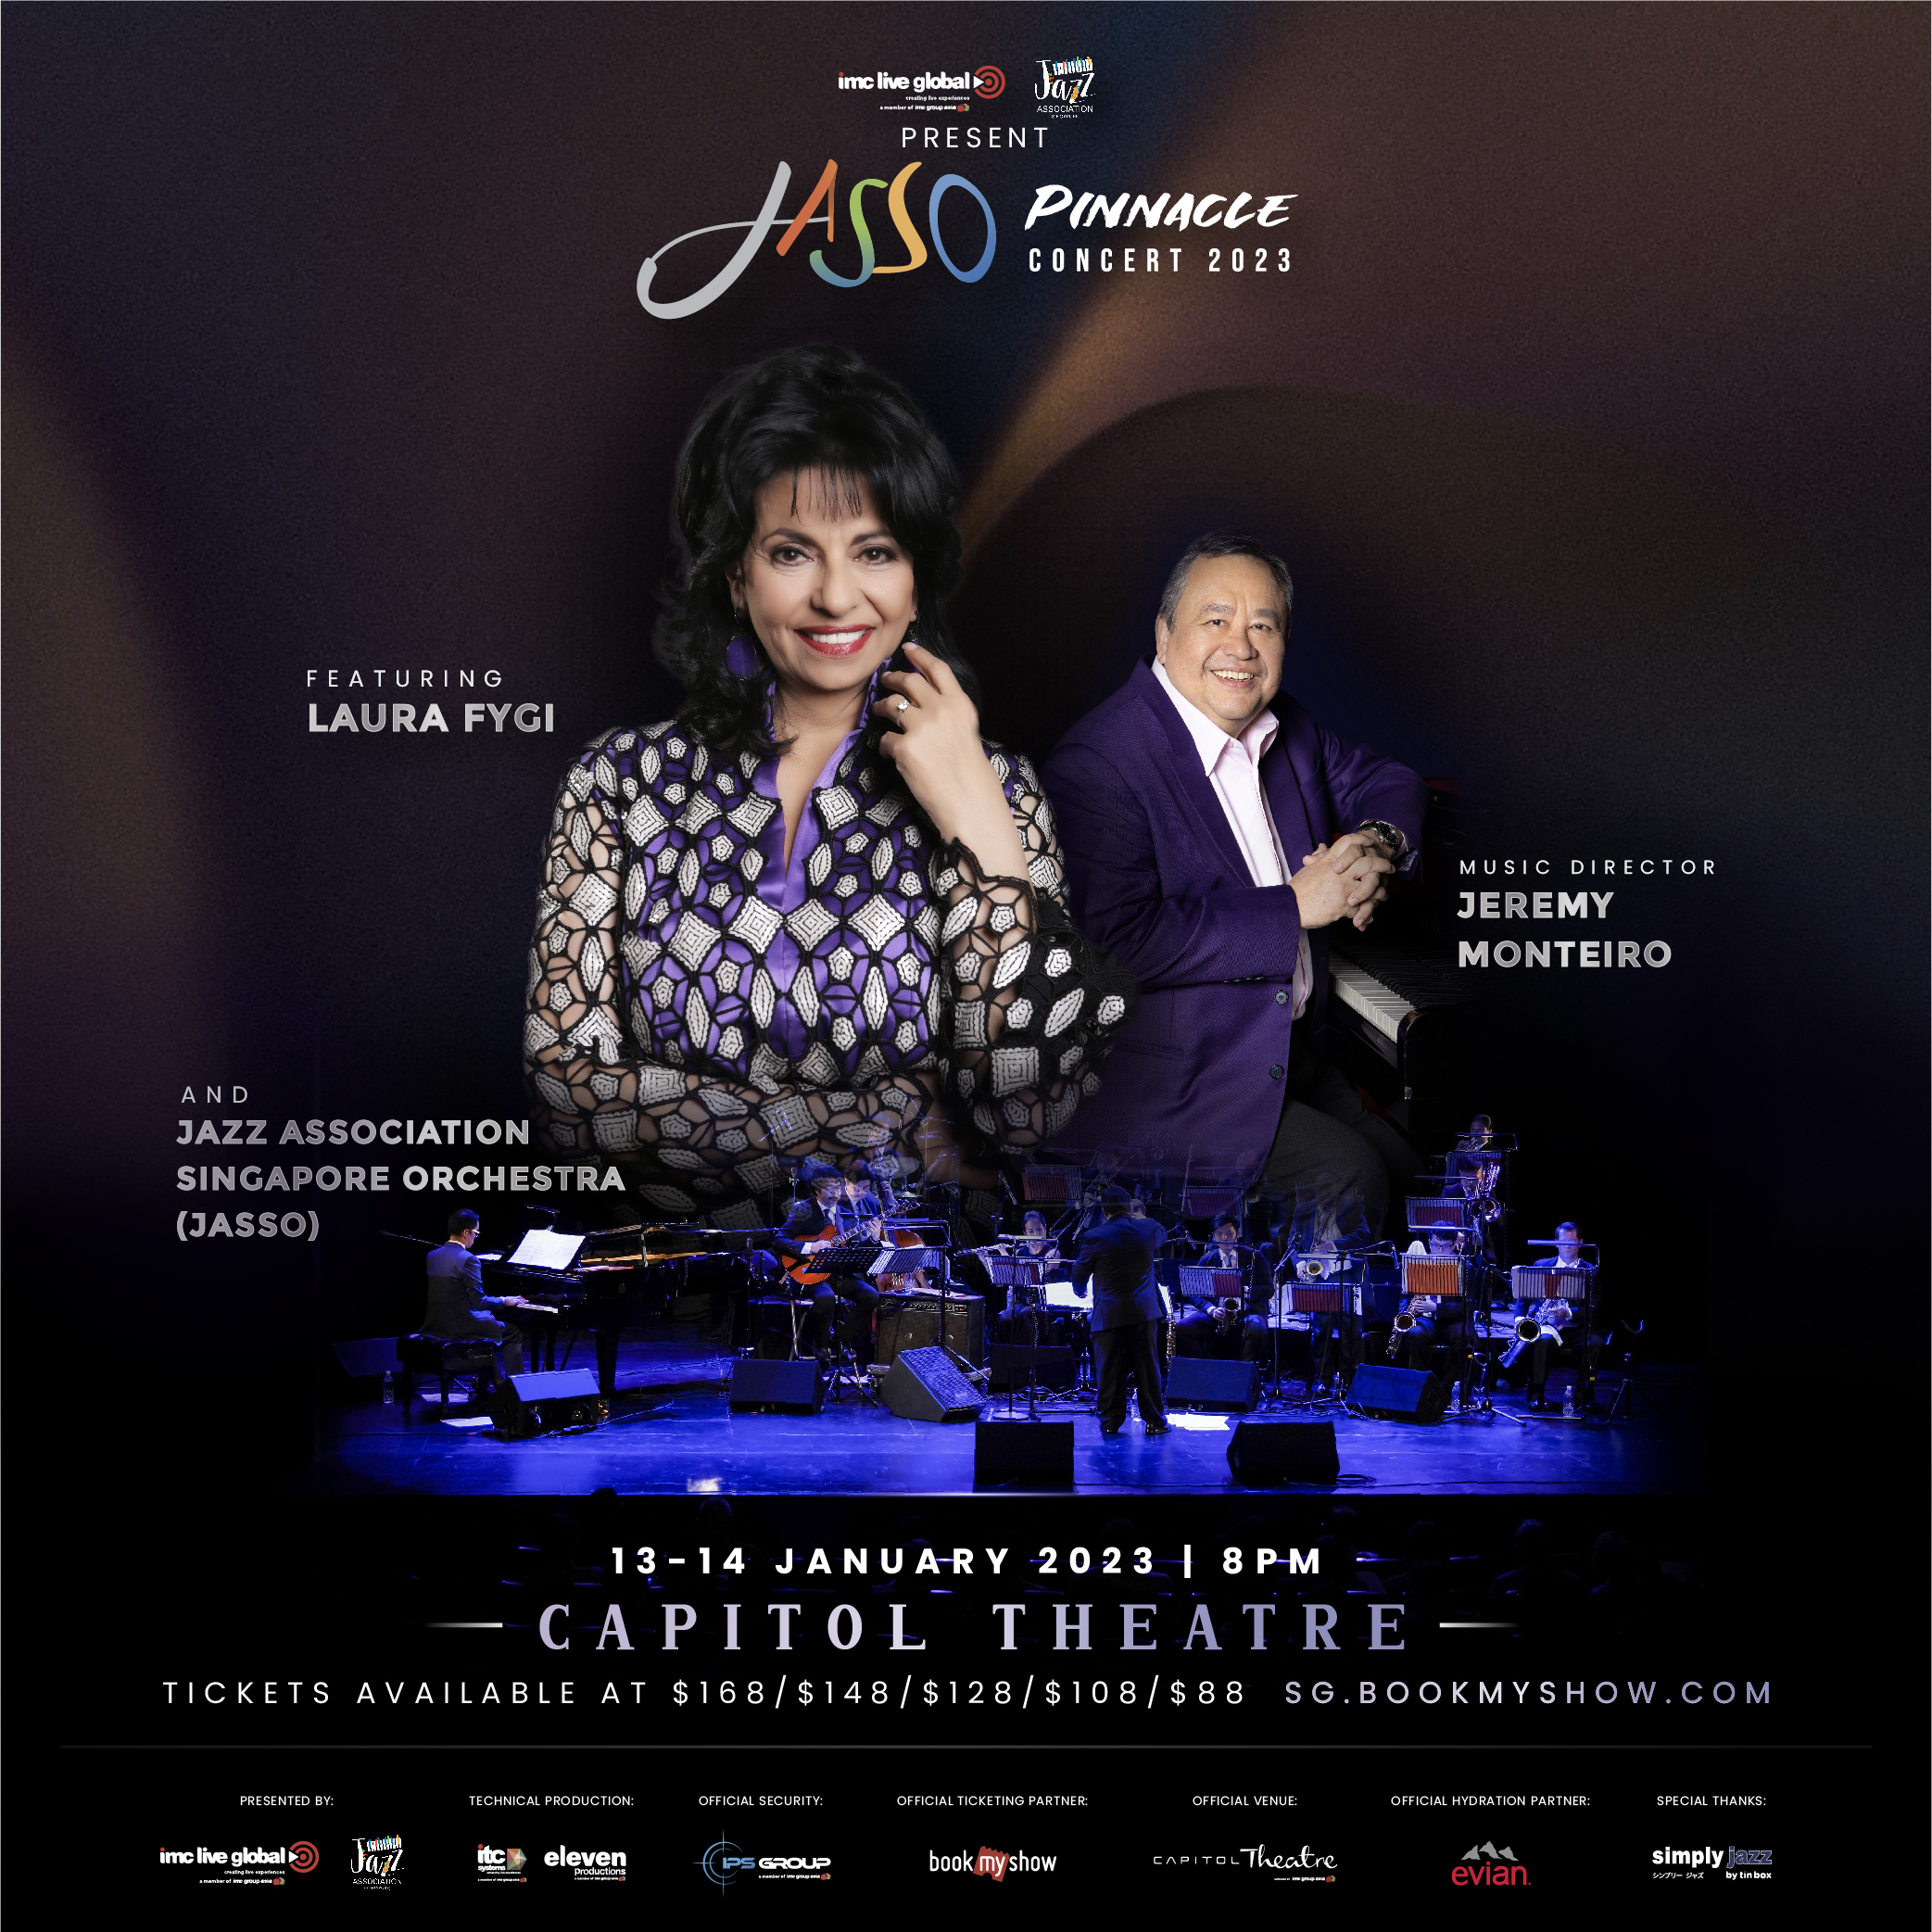 Laura Fygi, Internationally Acclaimed Singer,  Comes to Singapore for Two-Night Concert